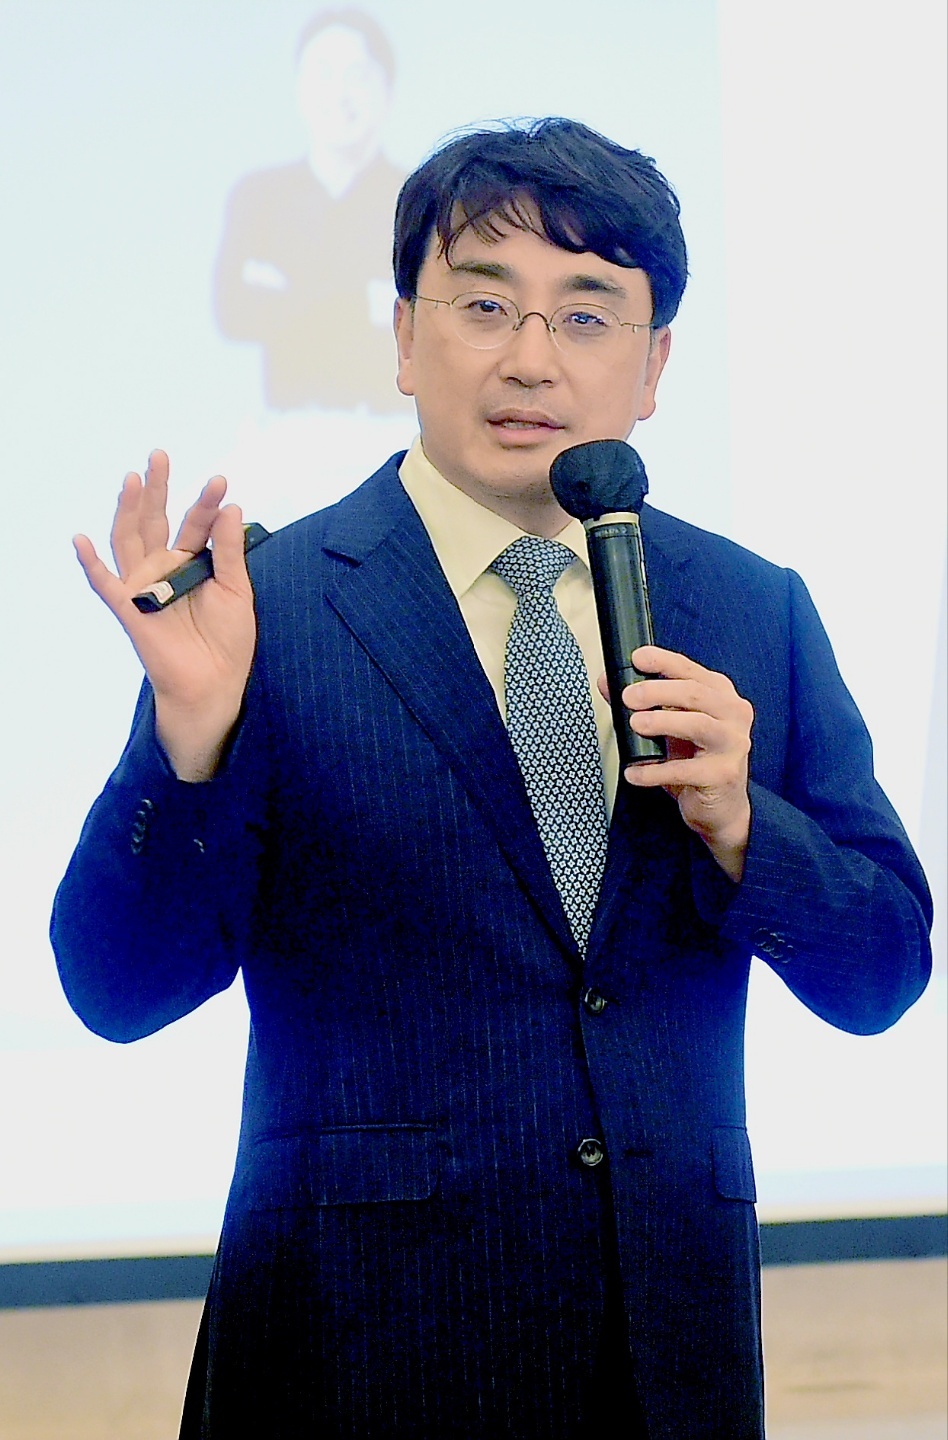 Cha In-hyuck, CEO of CJ Olive Networks, speaks at the Global Business Forum 2022 in Seoul on Wednesday. (The Korea Herald)